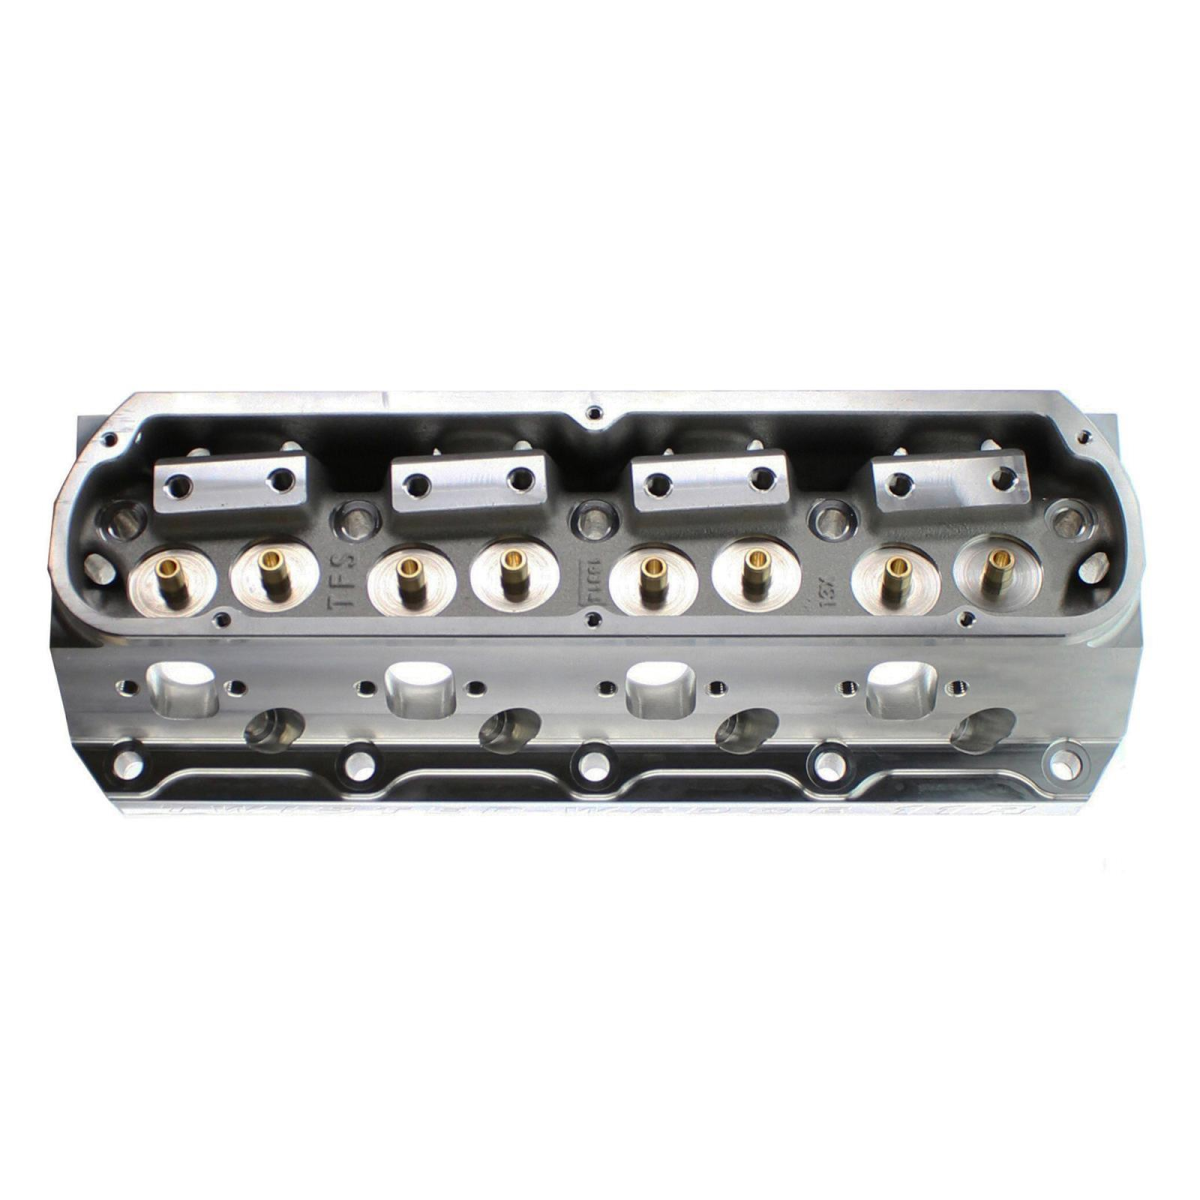 Trickflow - Trick Flow Twisted Wedge 11R Street 190cc Bare Cylinder Head Casting, SBF, 63cc Chambers - Image 1